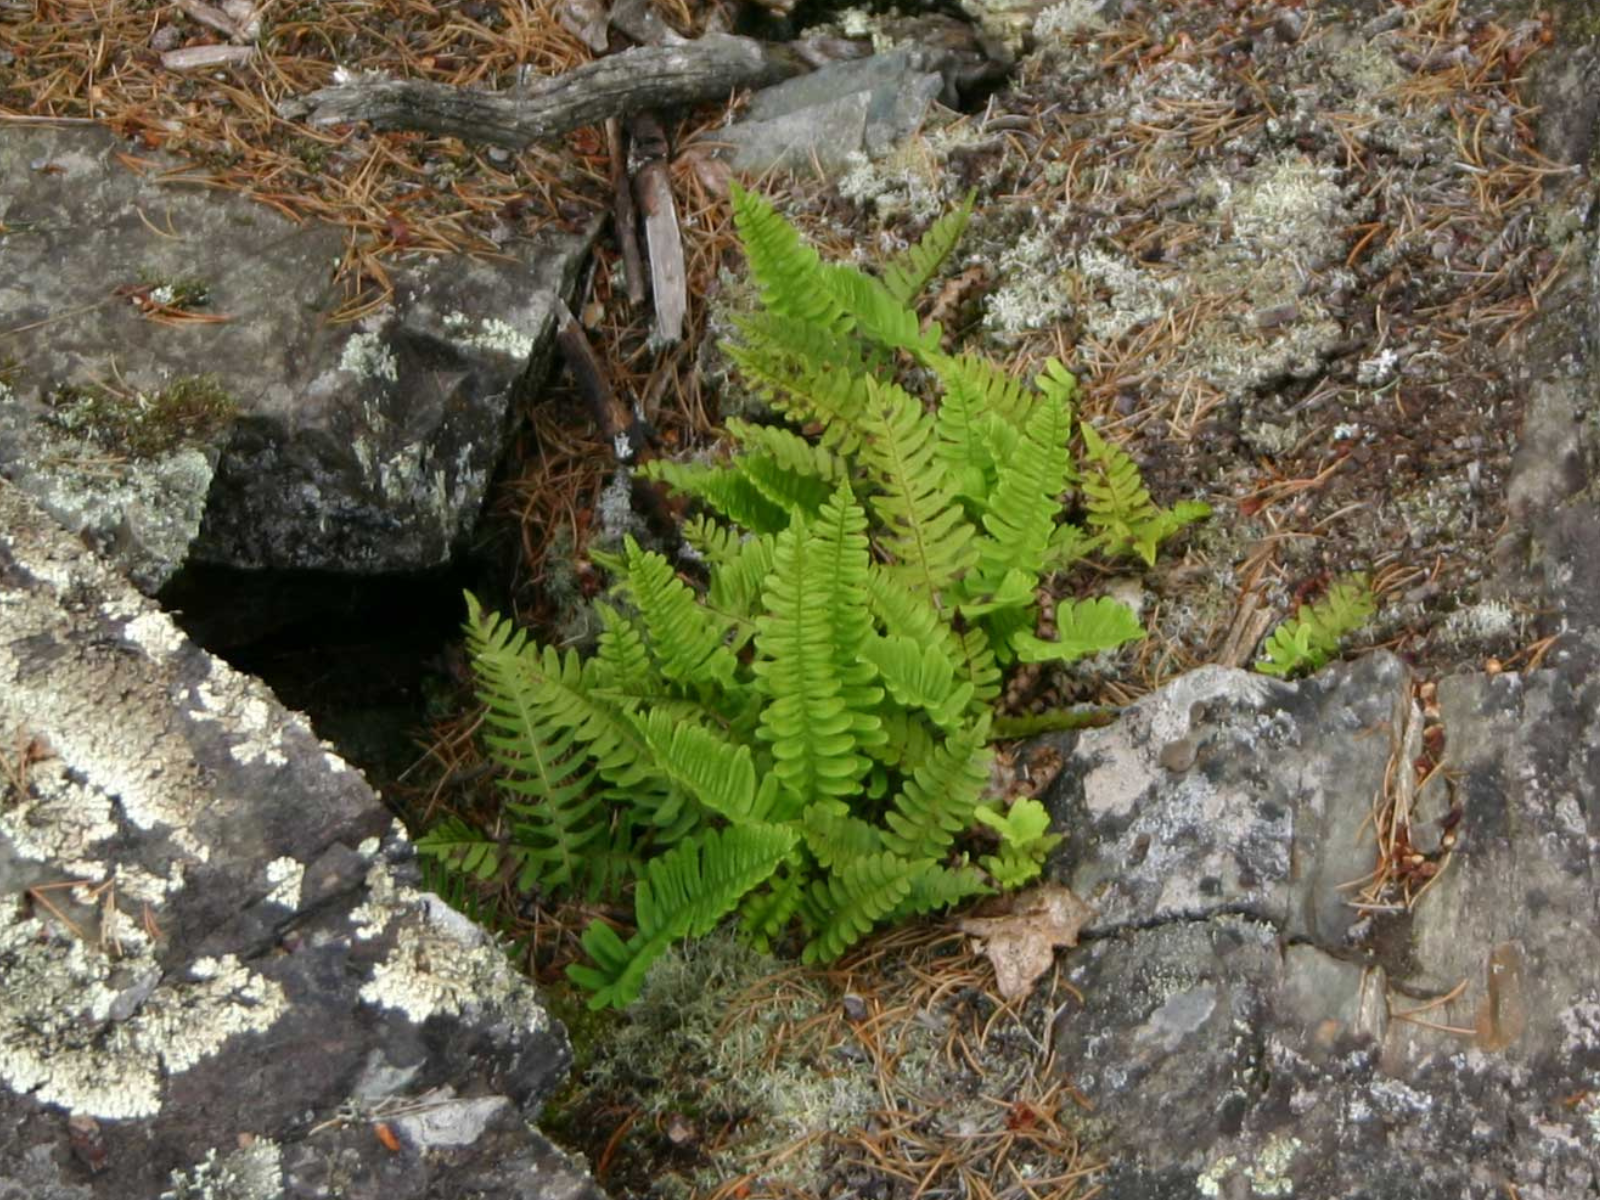 A small, green fern growing from a crevice between two rocks.